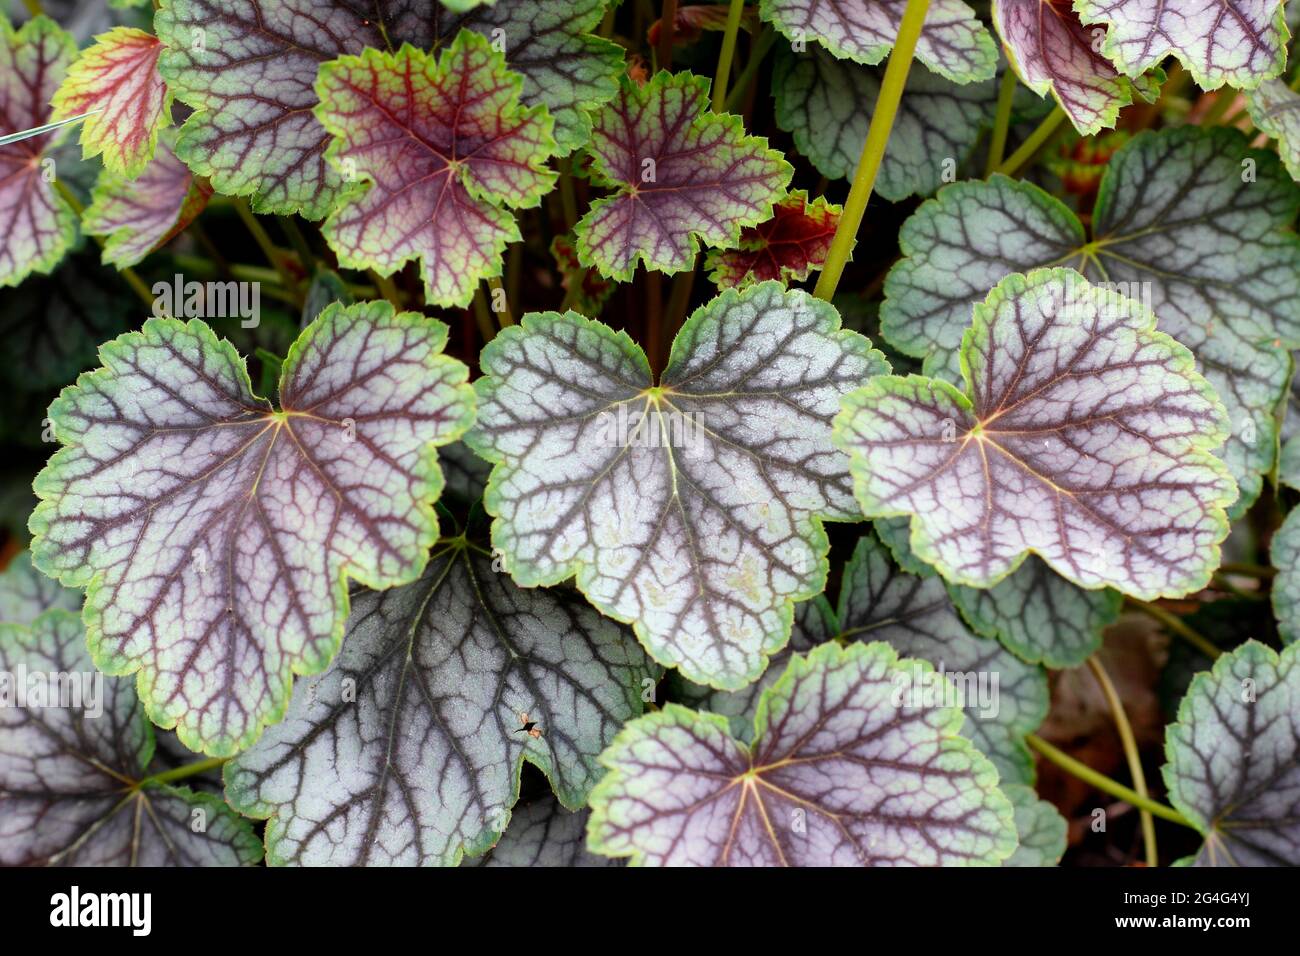 Heuchera 'Green Spice' coral bells displaying characteristic red veined foliage Stock Photo